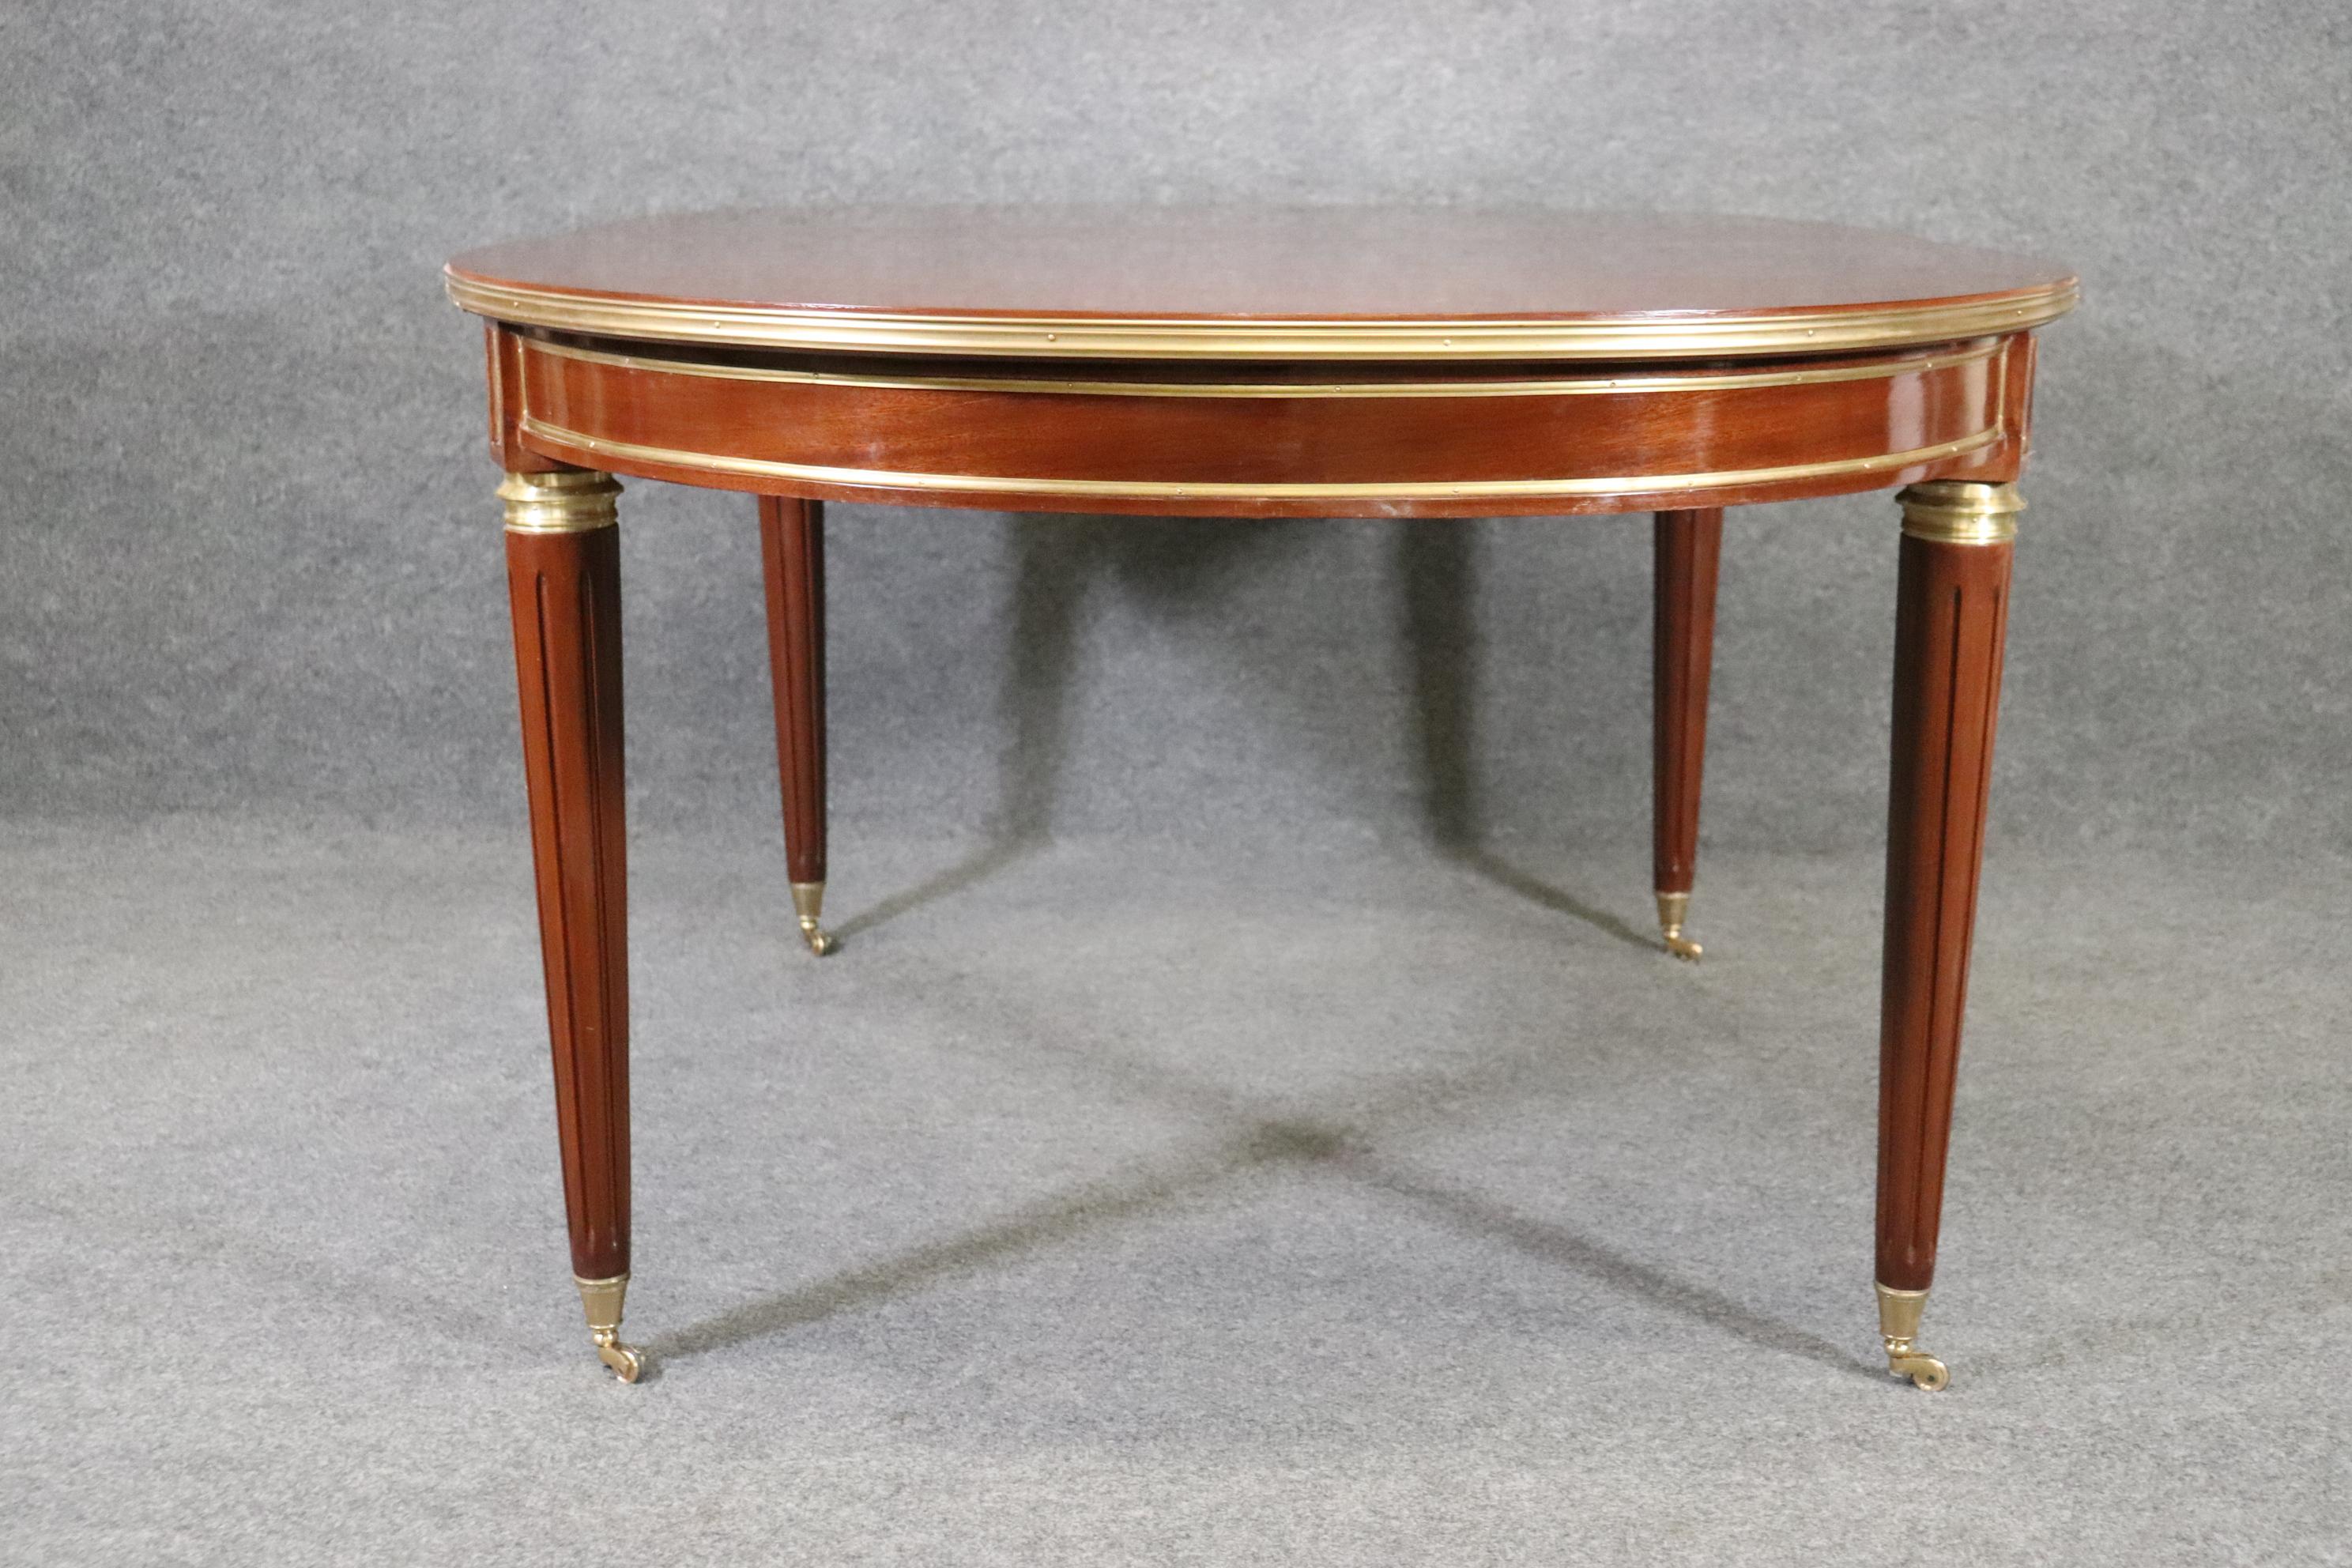 Directoire Superb Brass Trimmed Maison Jansen Style Mahogany Dining Table with 3 Leaves